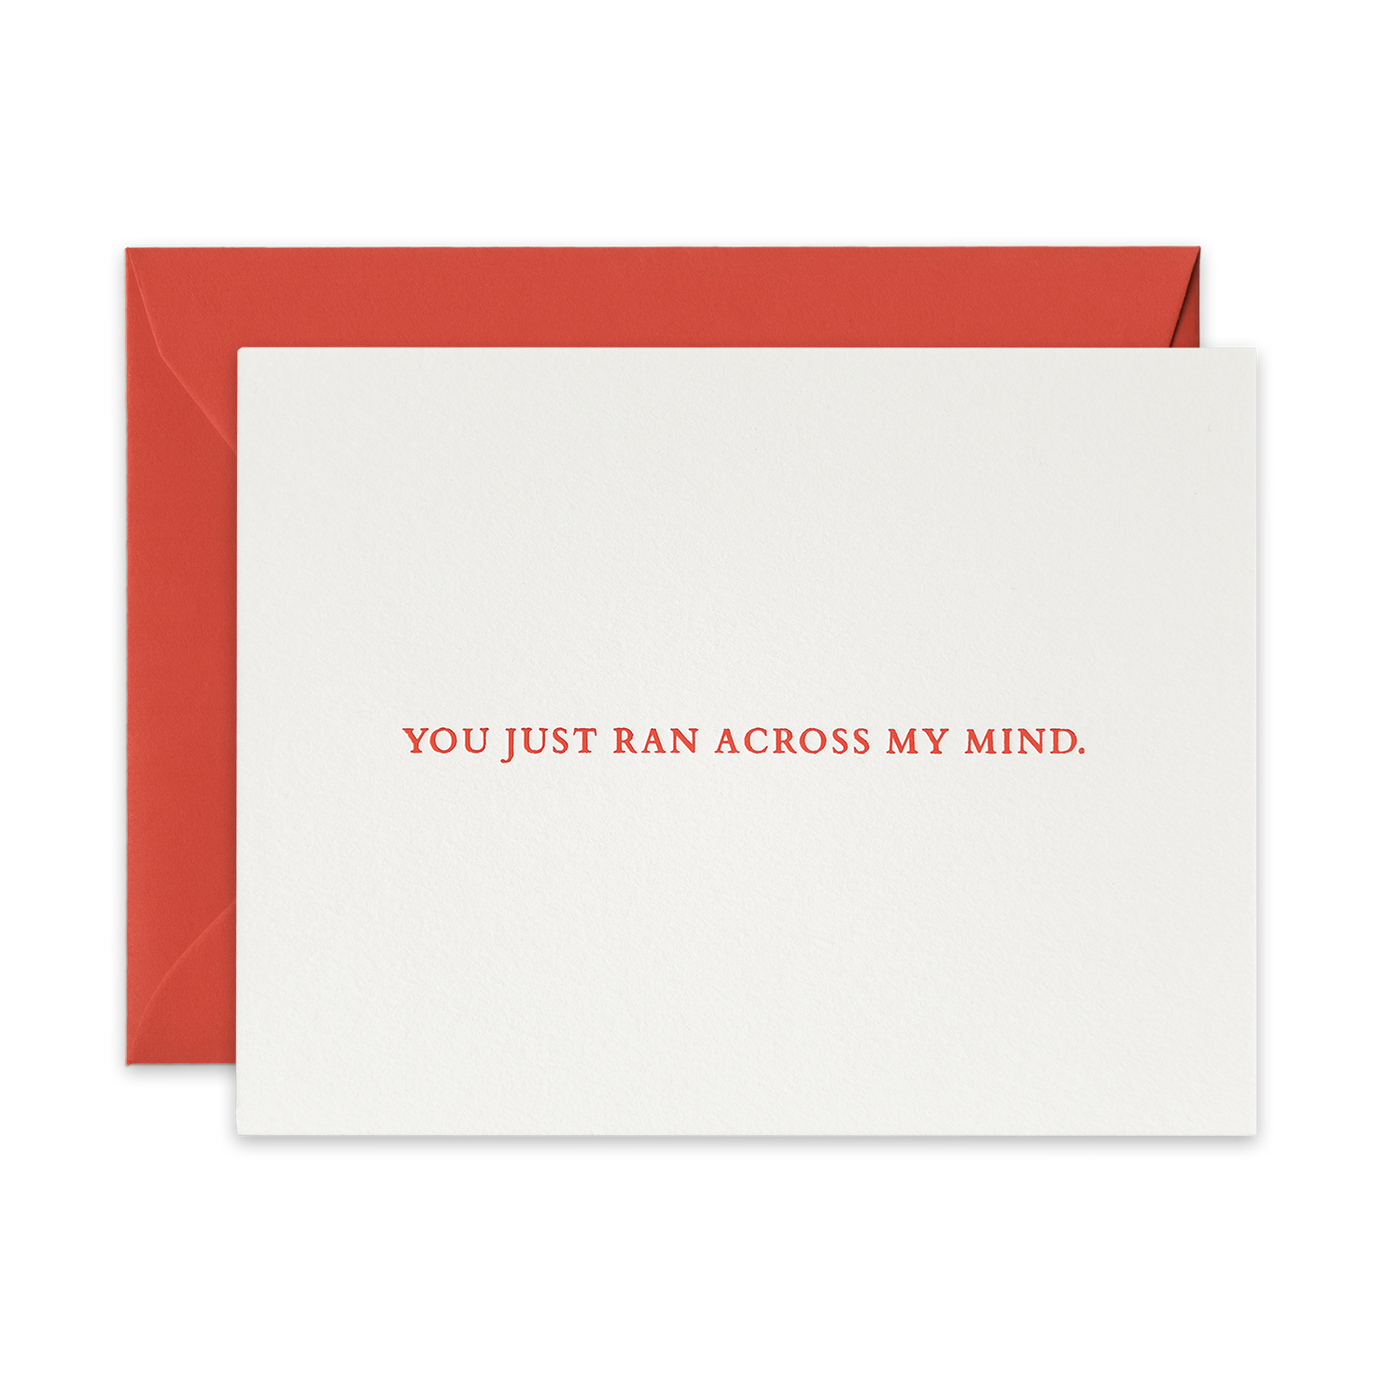 Peach foil letterpress greeting card by beknown. You just ran across my mind.